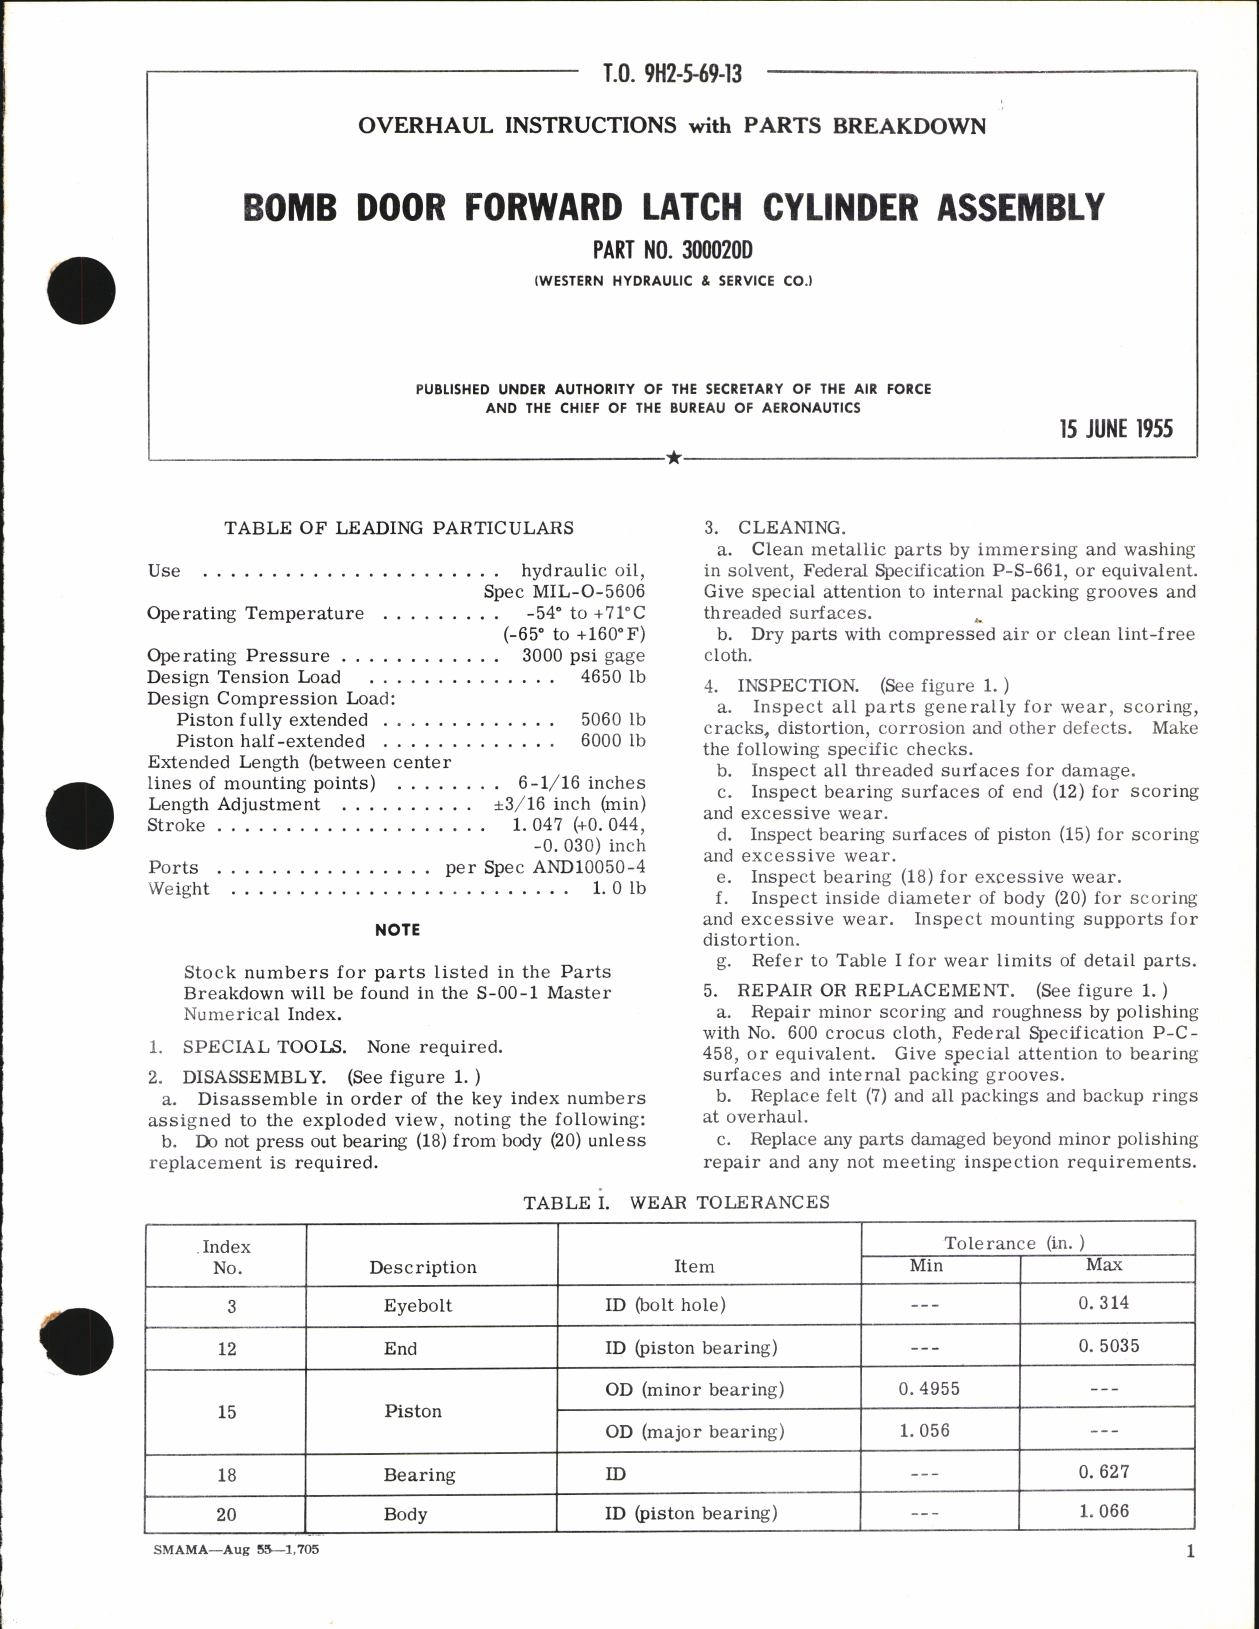 Sample page 1 from AirCorps Library document: Overhaul Instructions with Parts Breakdown for Bomb Door Forward Latch Cylinder Assembly Part No. 300020D